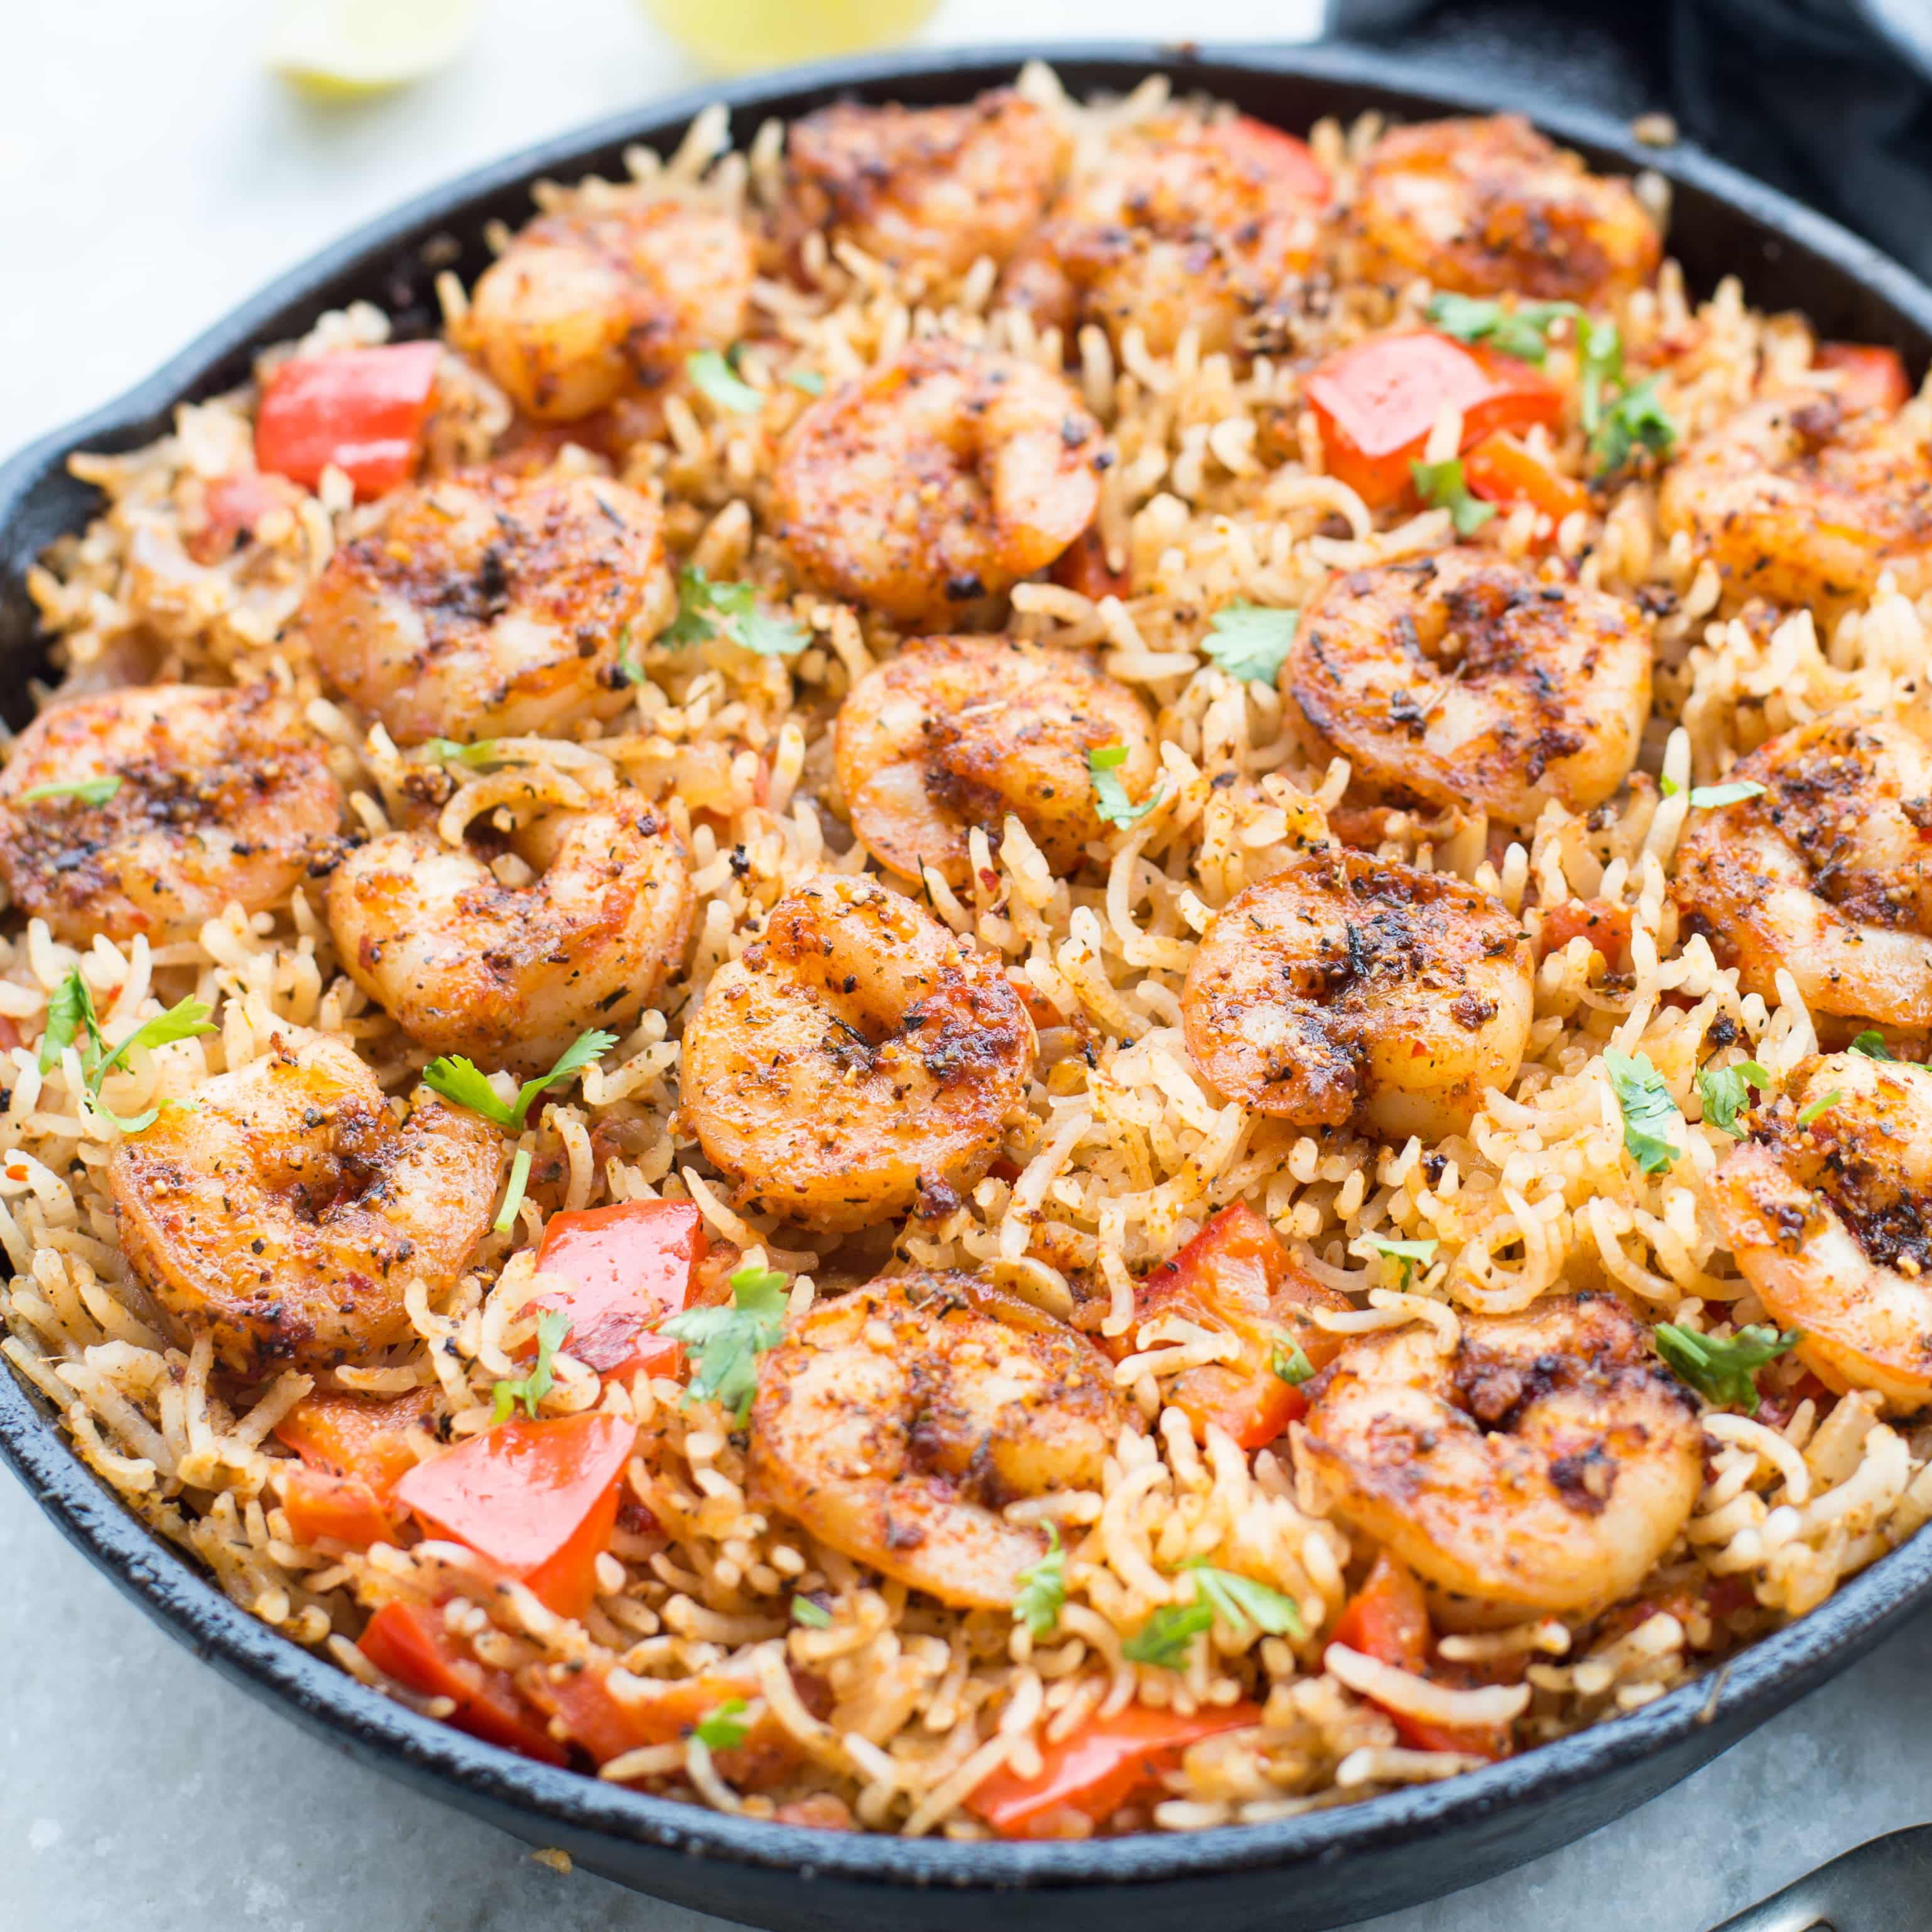 Cajun Shrimp and Rice Skillet are that one pan dinner recipe, your family is going to love. It is spicy with lots of flavour from Cajun Spice. A perfect Shrimp and rice recipe, that takes less than 30 minutes from stove to table.